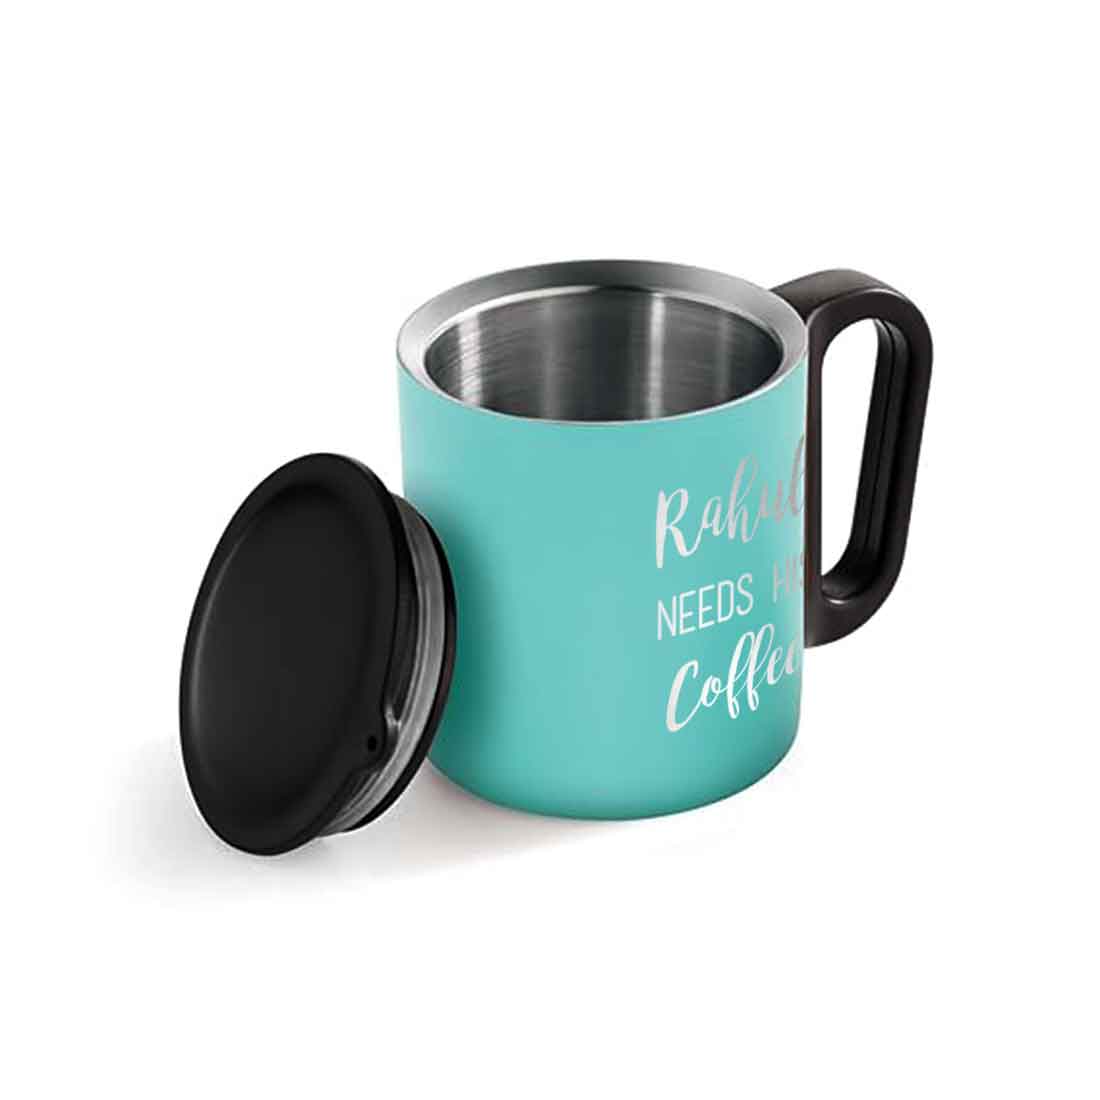 Personalized Stainless Steel Mug for Coffee - Insulated Cup with Lid